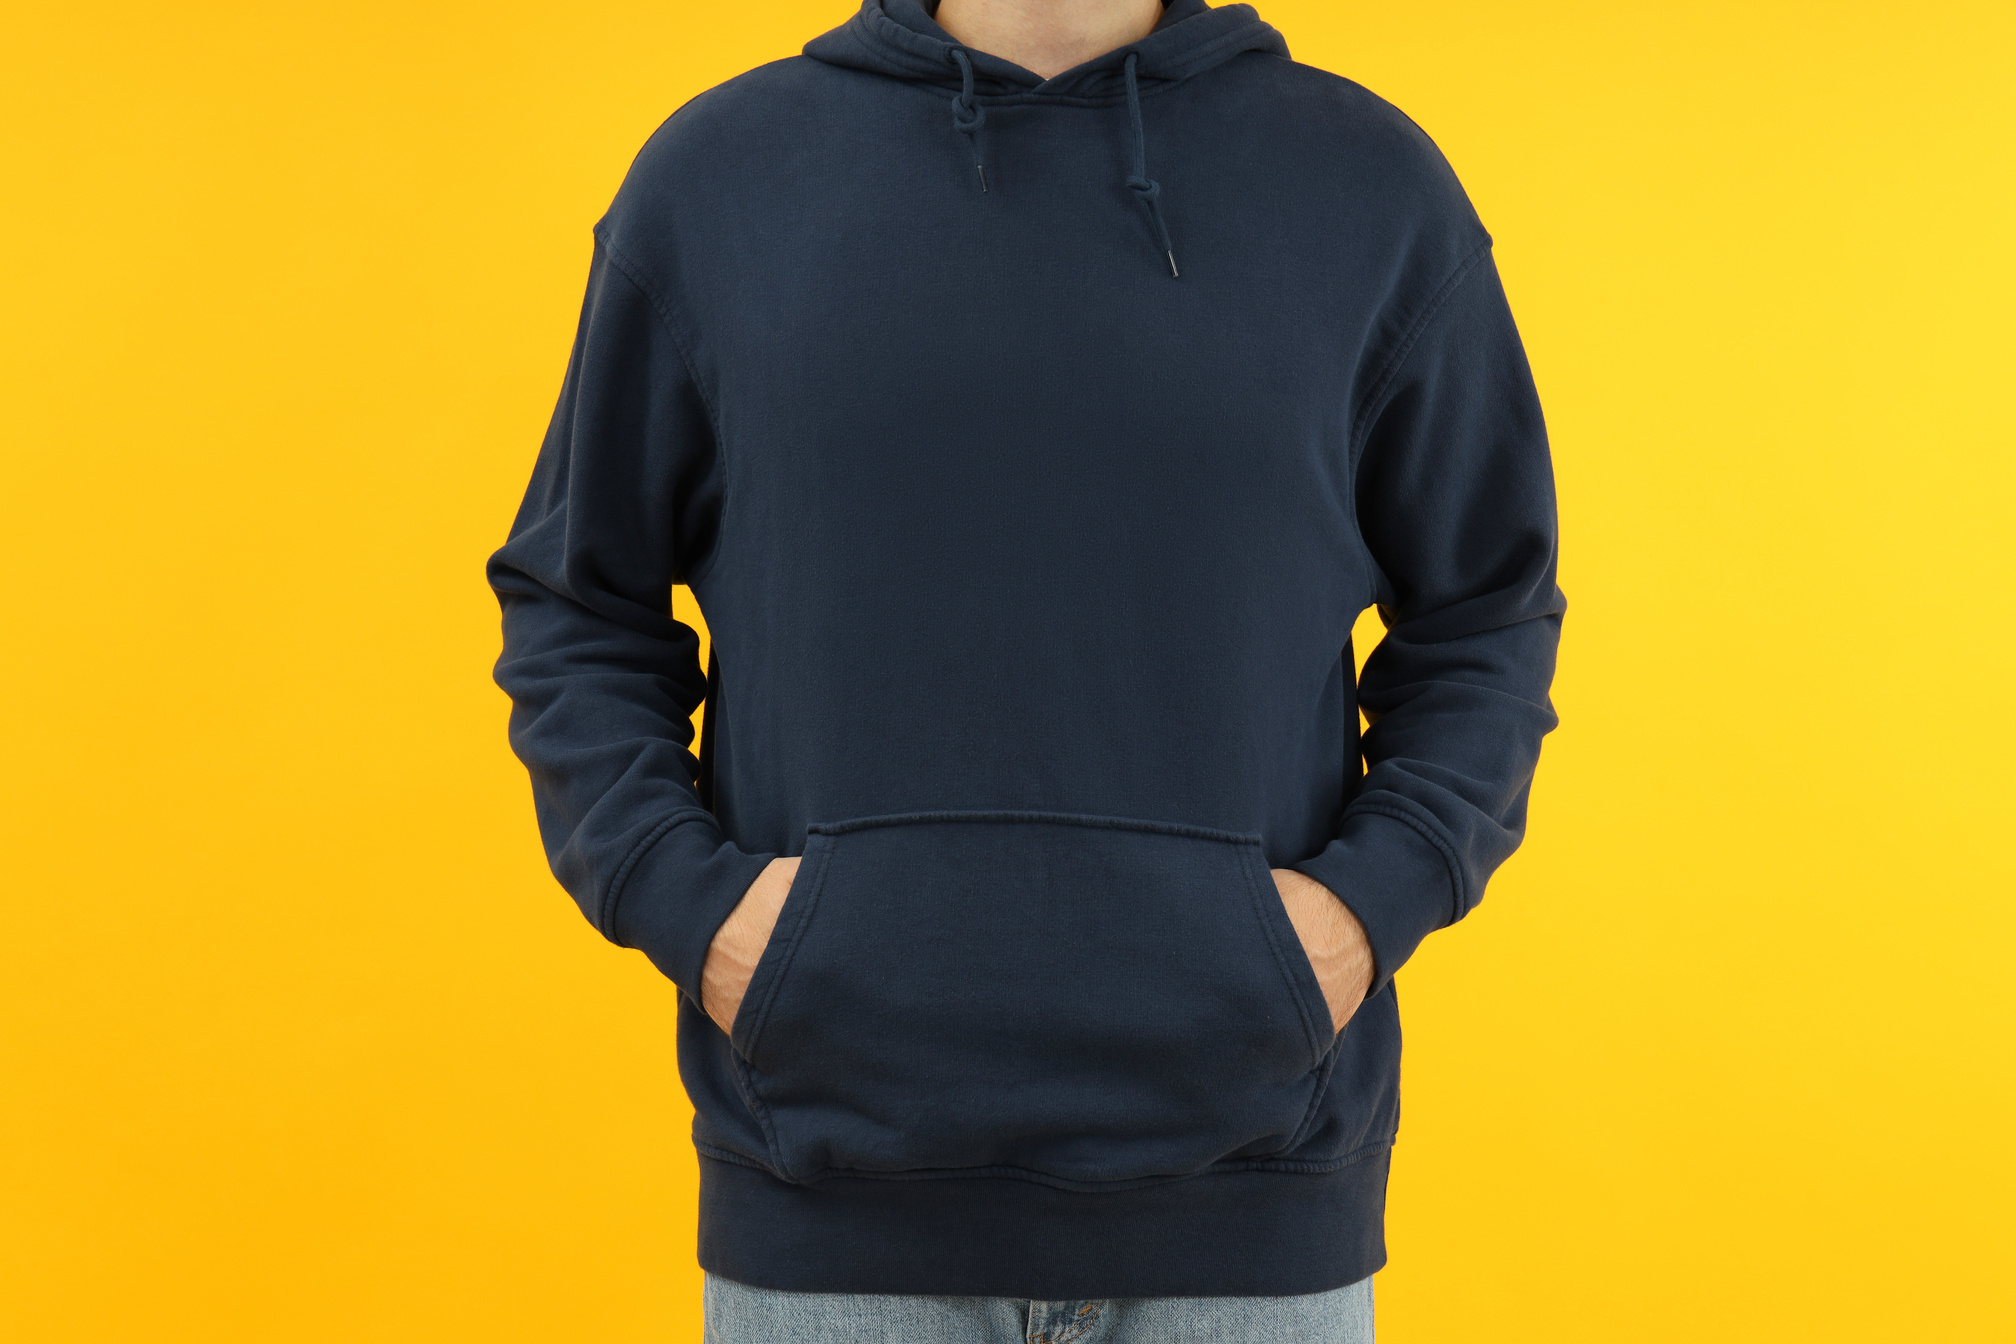 Man in Hoodie with Hands in Pocket on Yellow Background